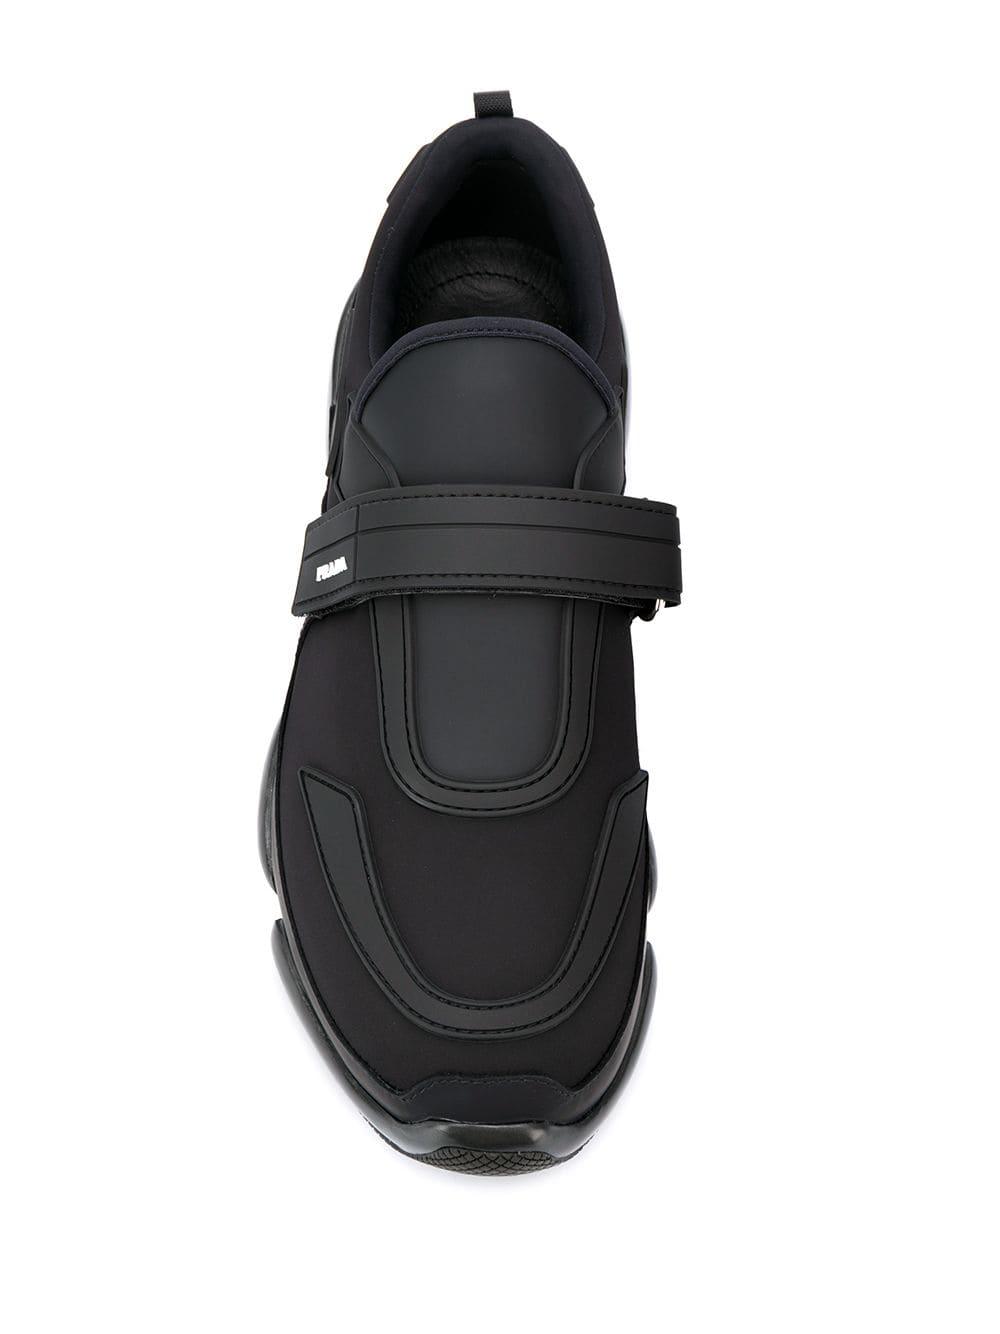 Prada Leather Cloudbust Sneakers in Black for Men - Save 15% - Lyst